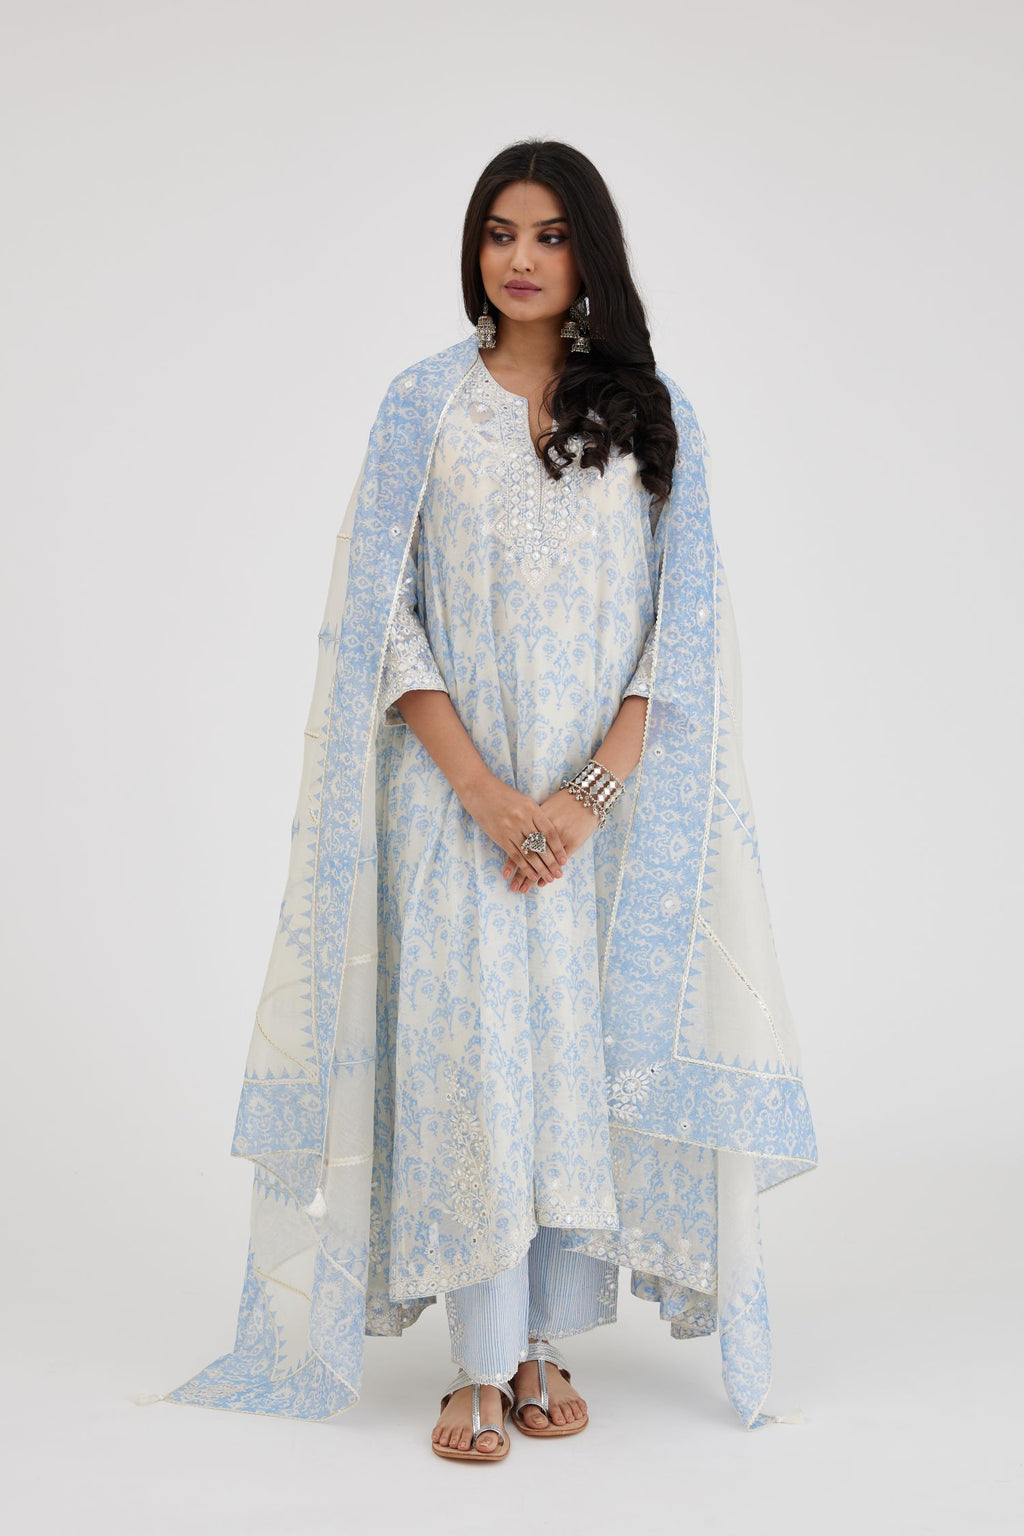 Ikat design blue and off white hand block-printed Cotton Chanderi panelled and asymmetric hem long kurta set with off-white thread and mirror embroidery.